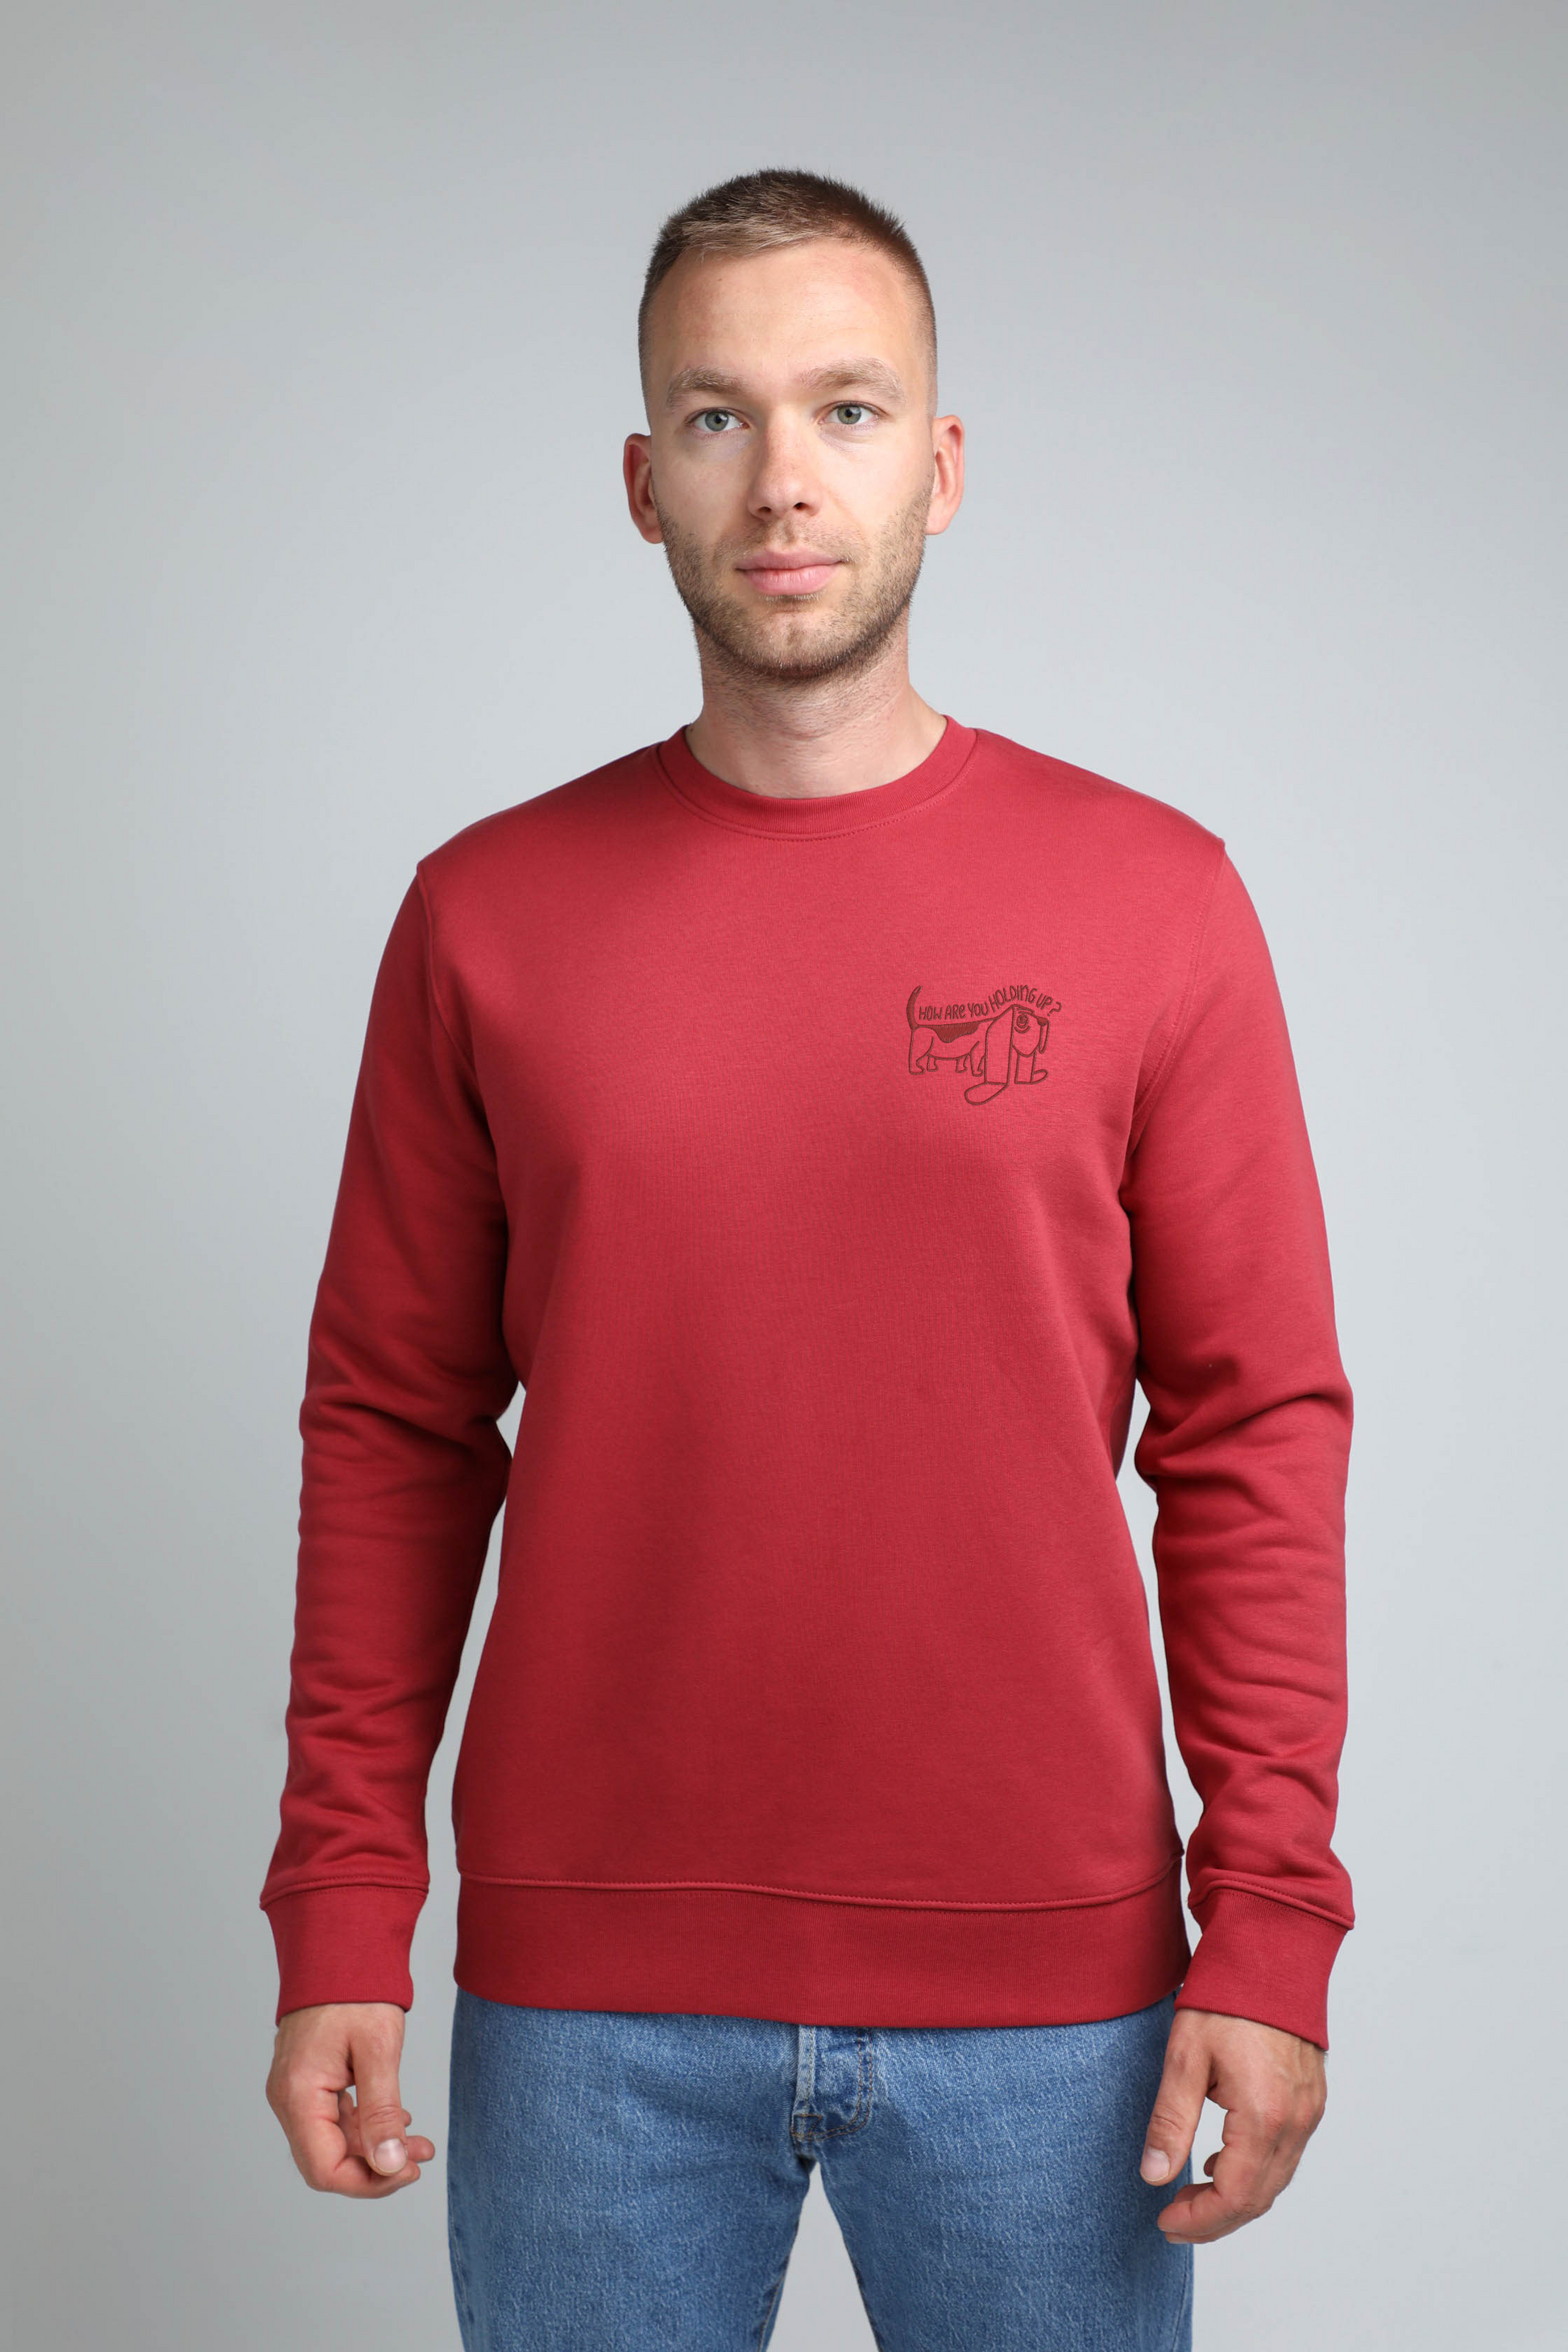 XL available only | How are you holding up? | Crew neck sweatshirt with embroidered dog. Regular fit | Unisex - premium dog goods handmade in Europe by animalistus